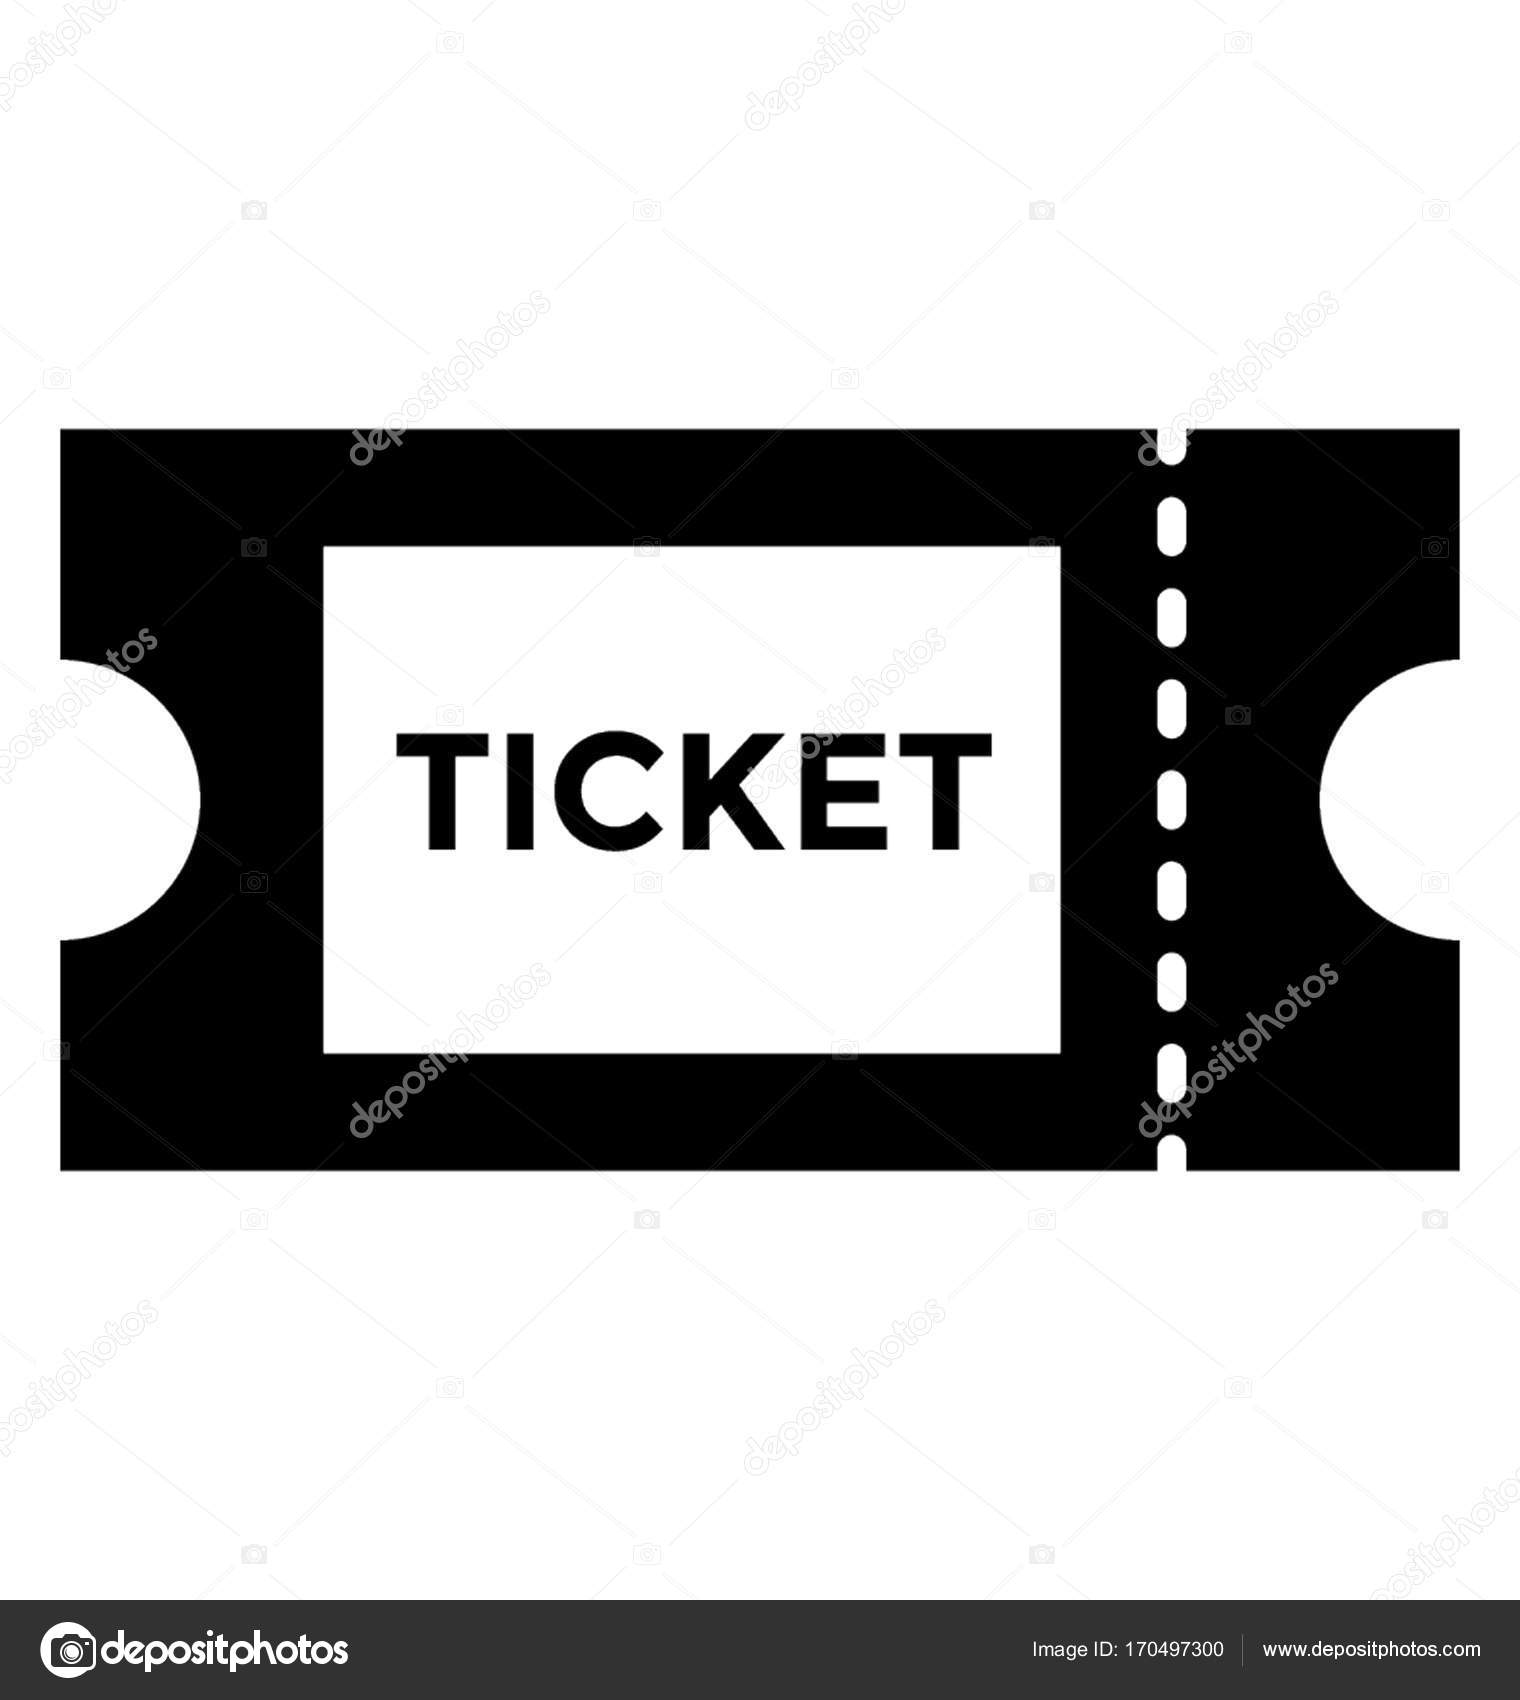 Ticket vector icon. Stock image and royalty-free vector files on 